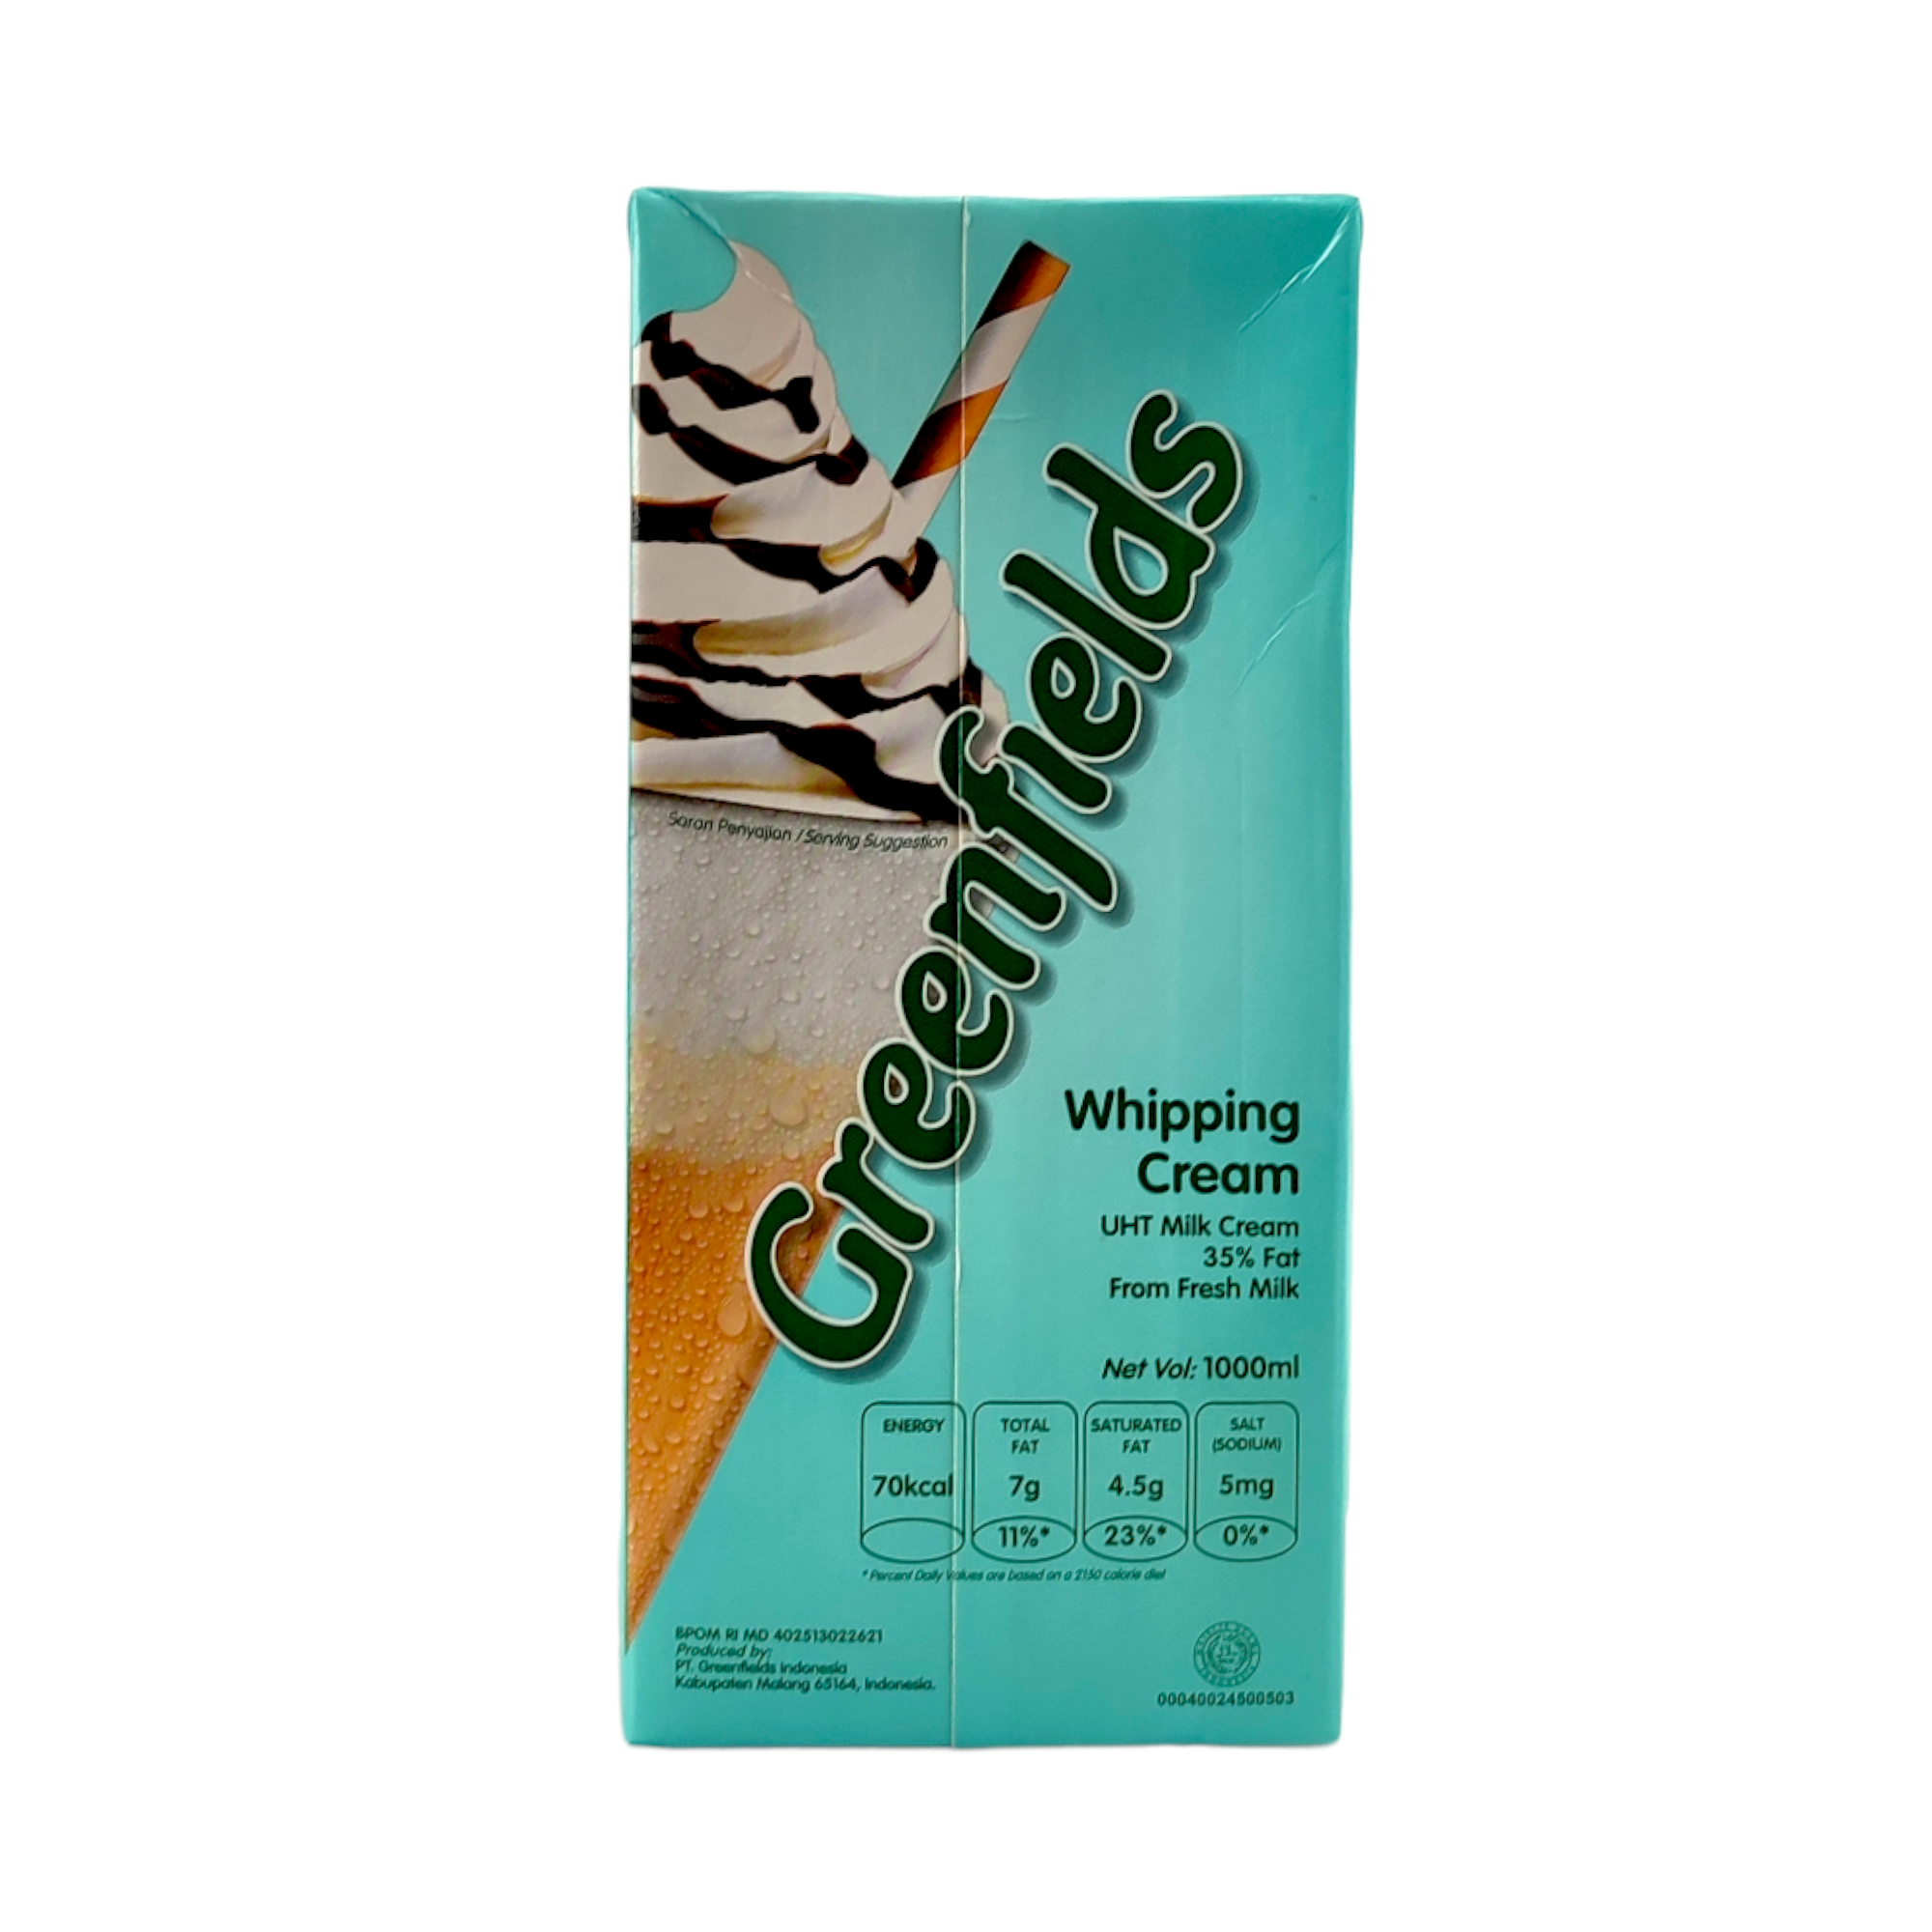 Greenfields Whipping Cream Price